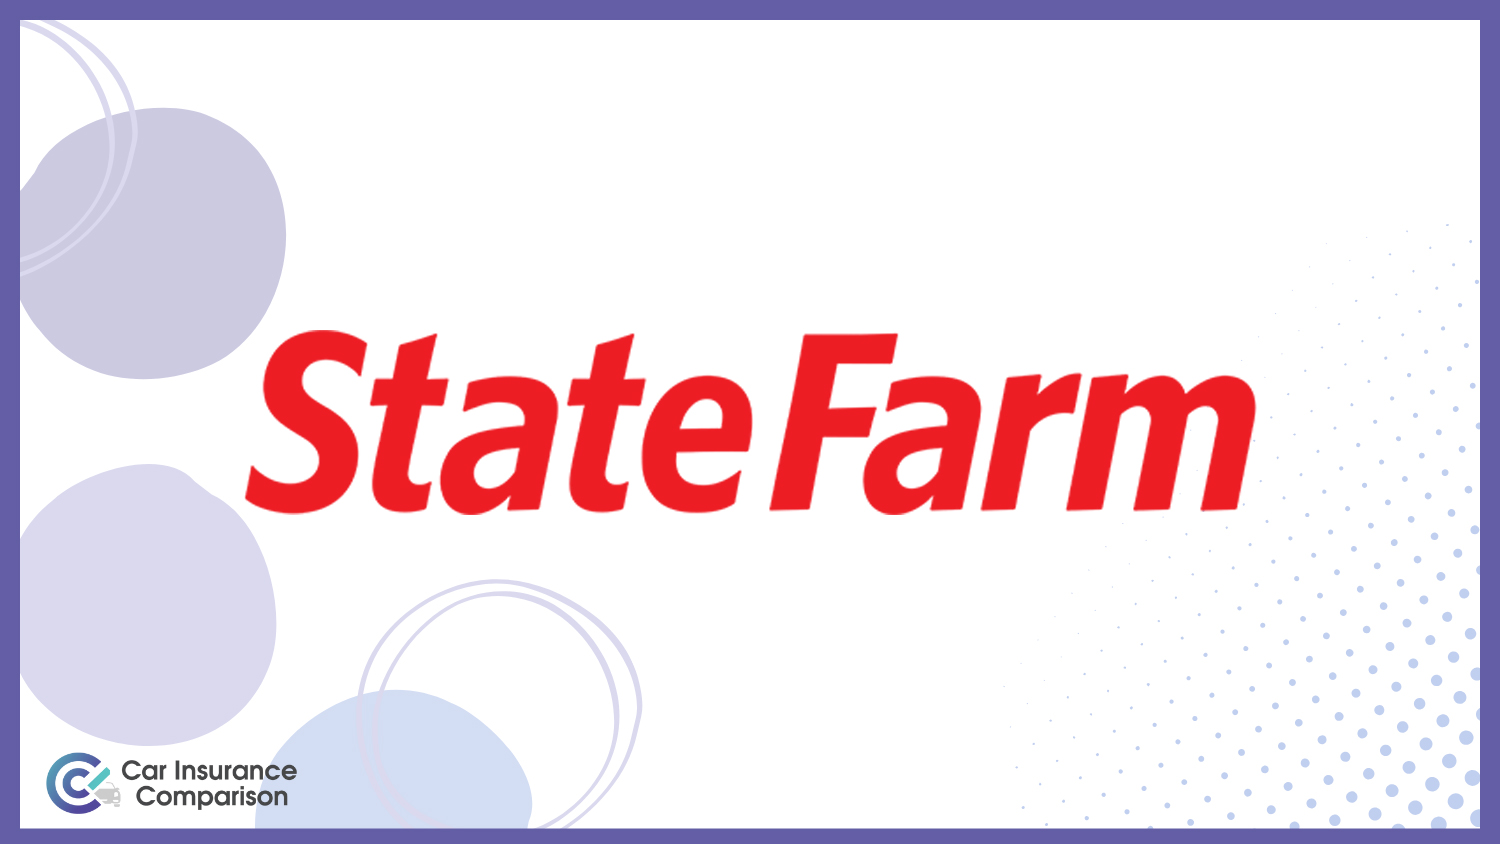 State Farm: Best Car Insurance for Low-Income Drivers